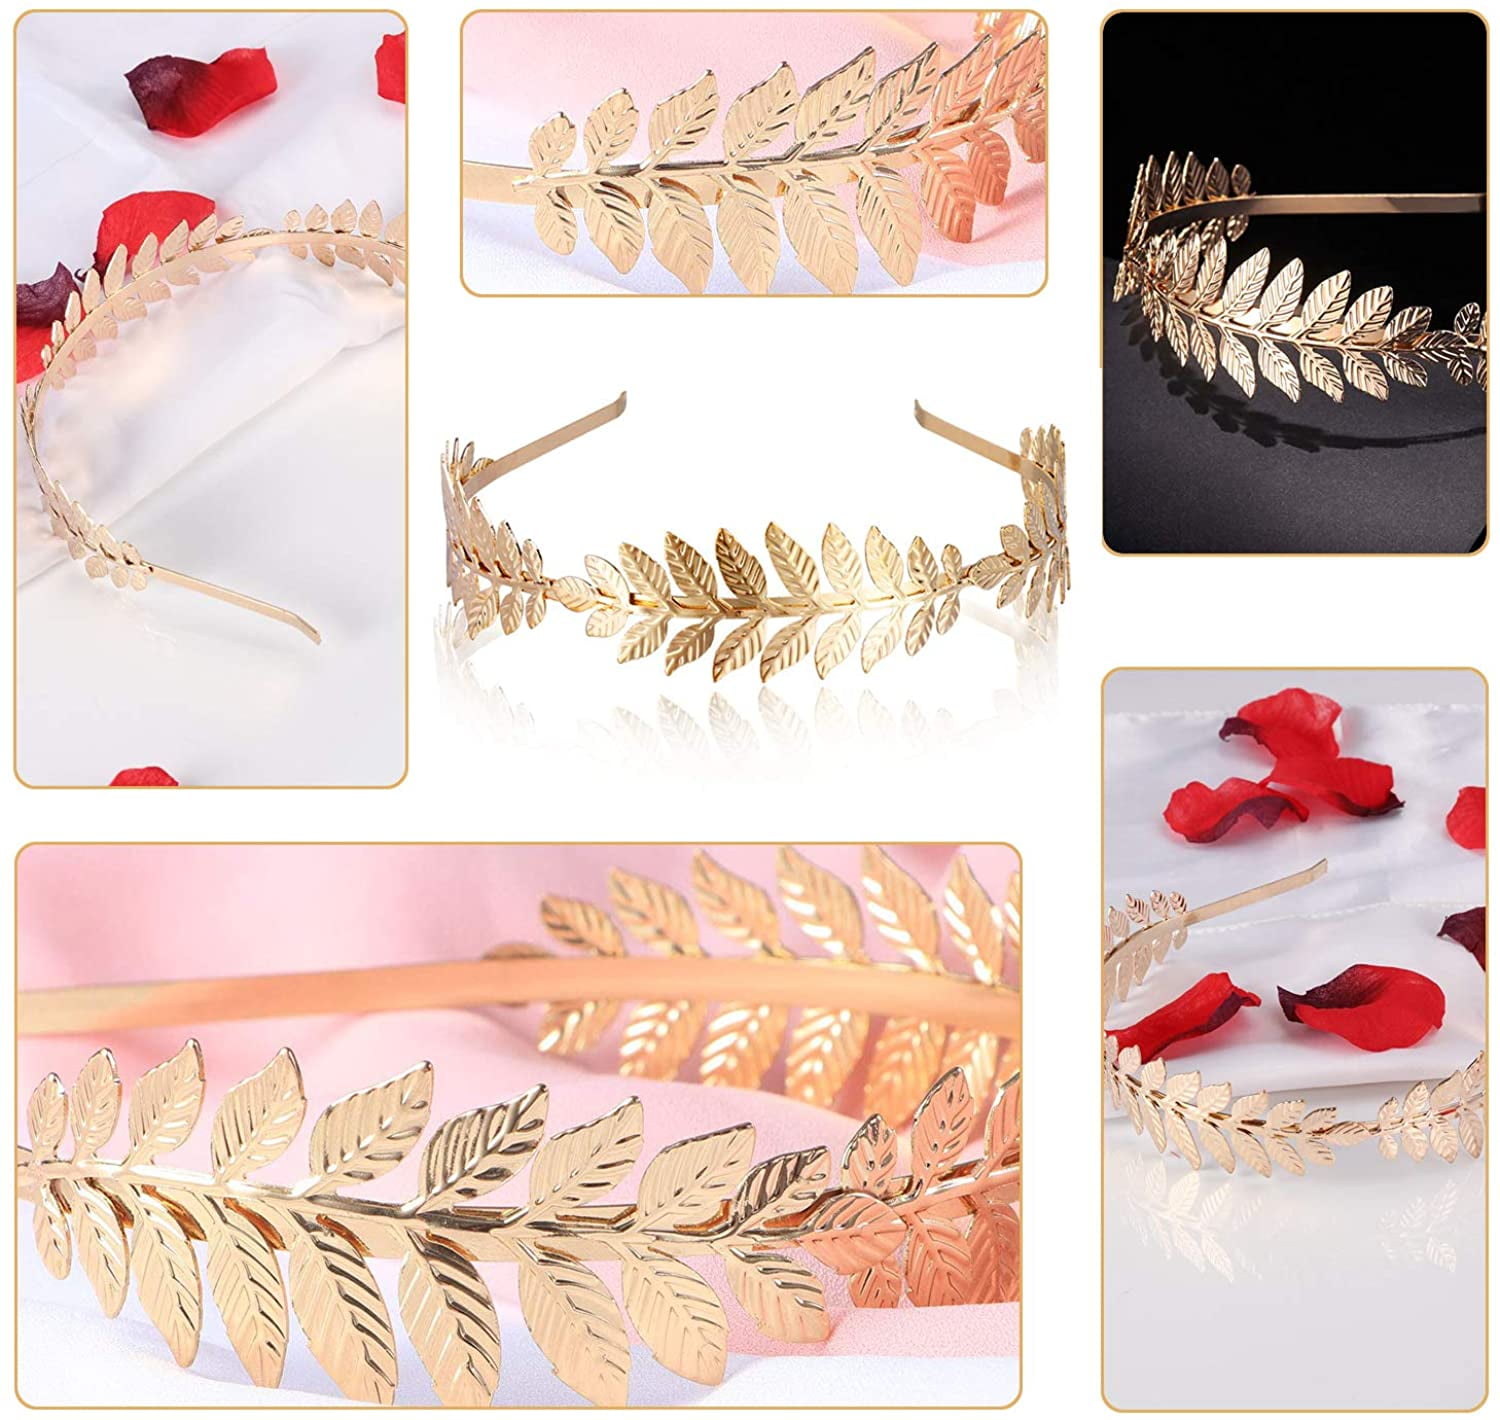  FRCOLOR 2pcs Our Lady's Headband Headband Gold Goddess Hair  Band Spiked Goddess Headdress Golden Wedding Ceremony Decorations Women  Hair Decor Miss Accessories Metal Photo : Beauty & Personal Care